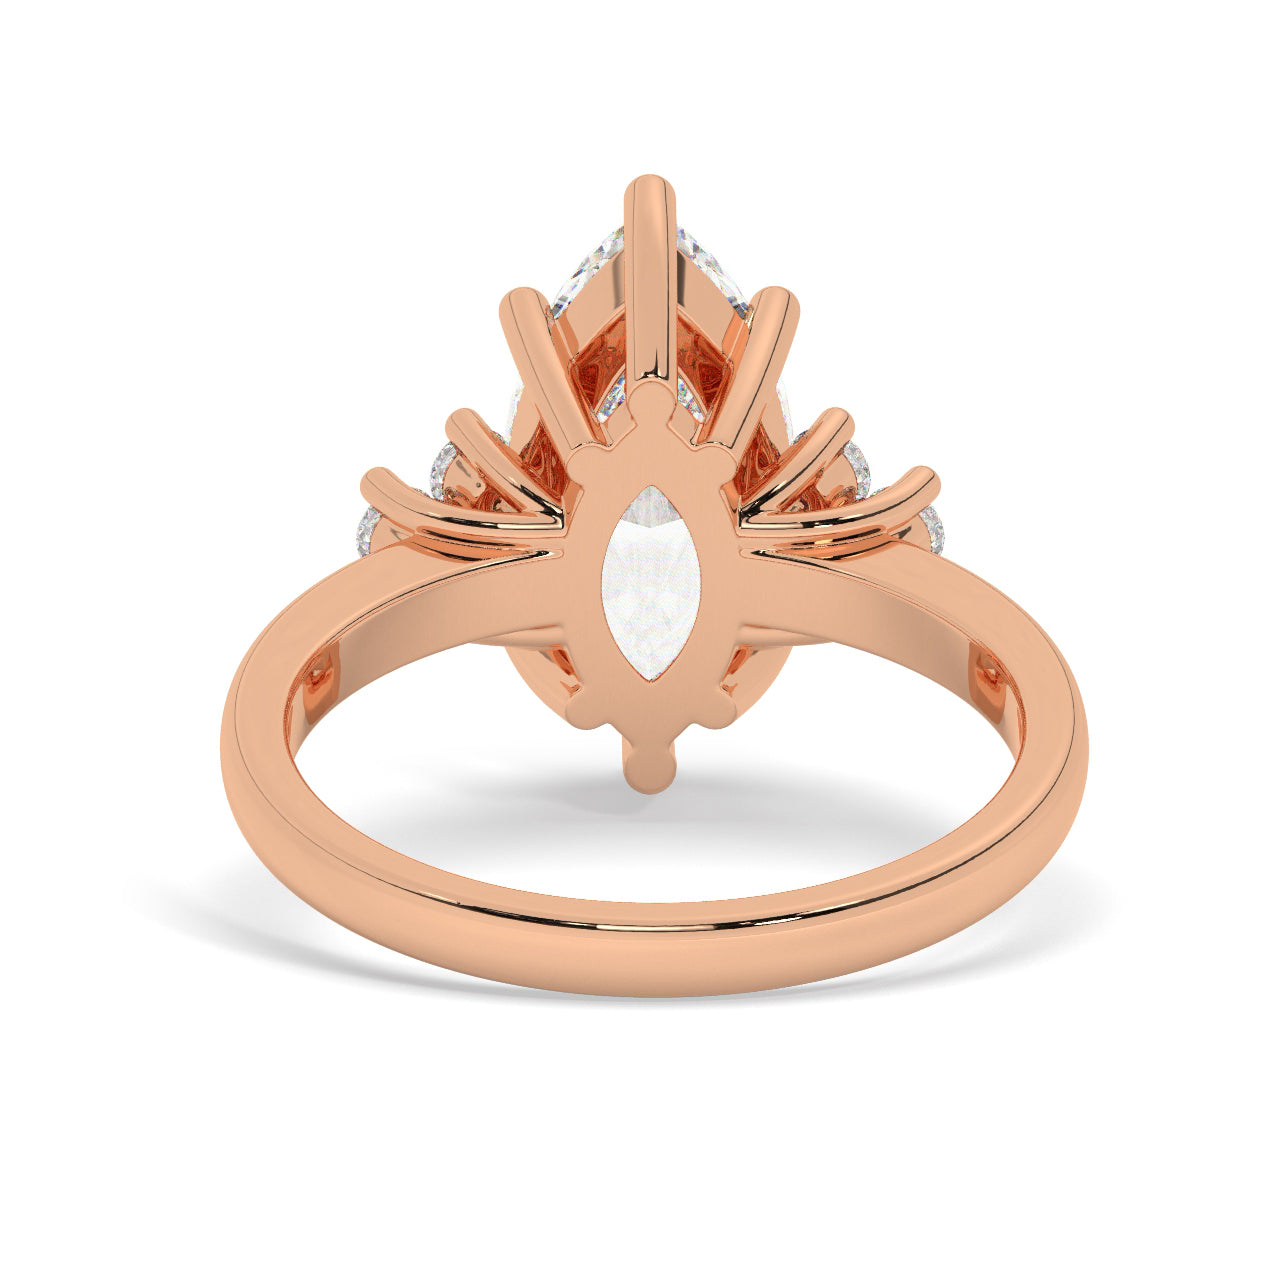 Rose Gold Marquis Cut Engagement Ring Accompanied by Round Stones - Back View